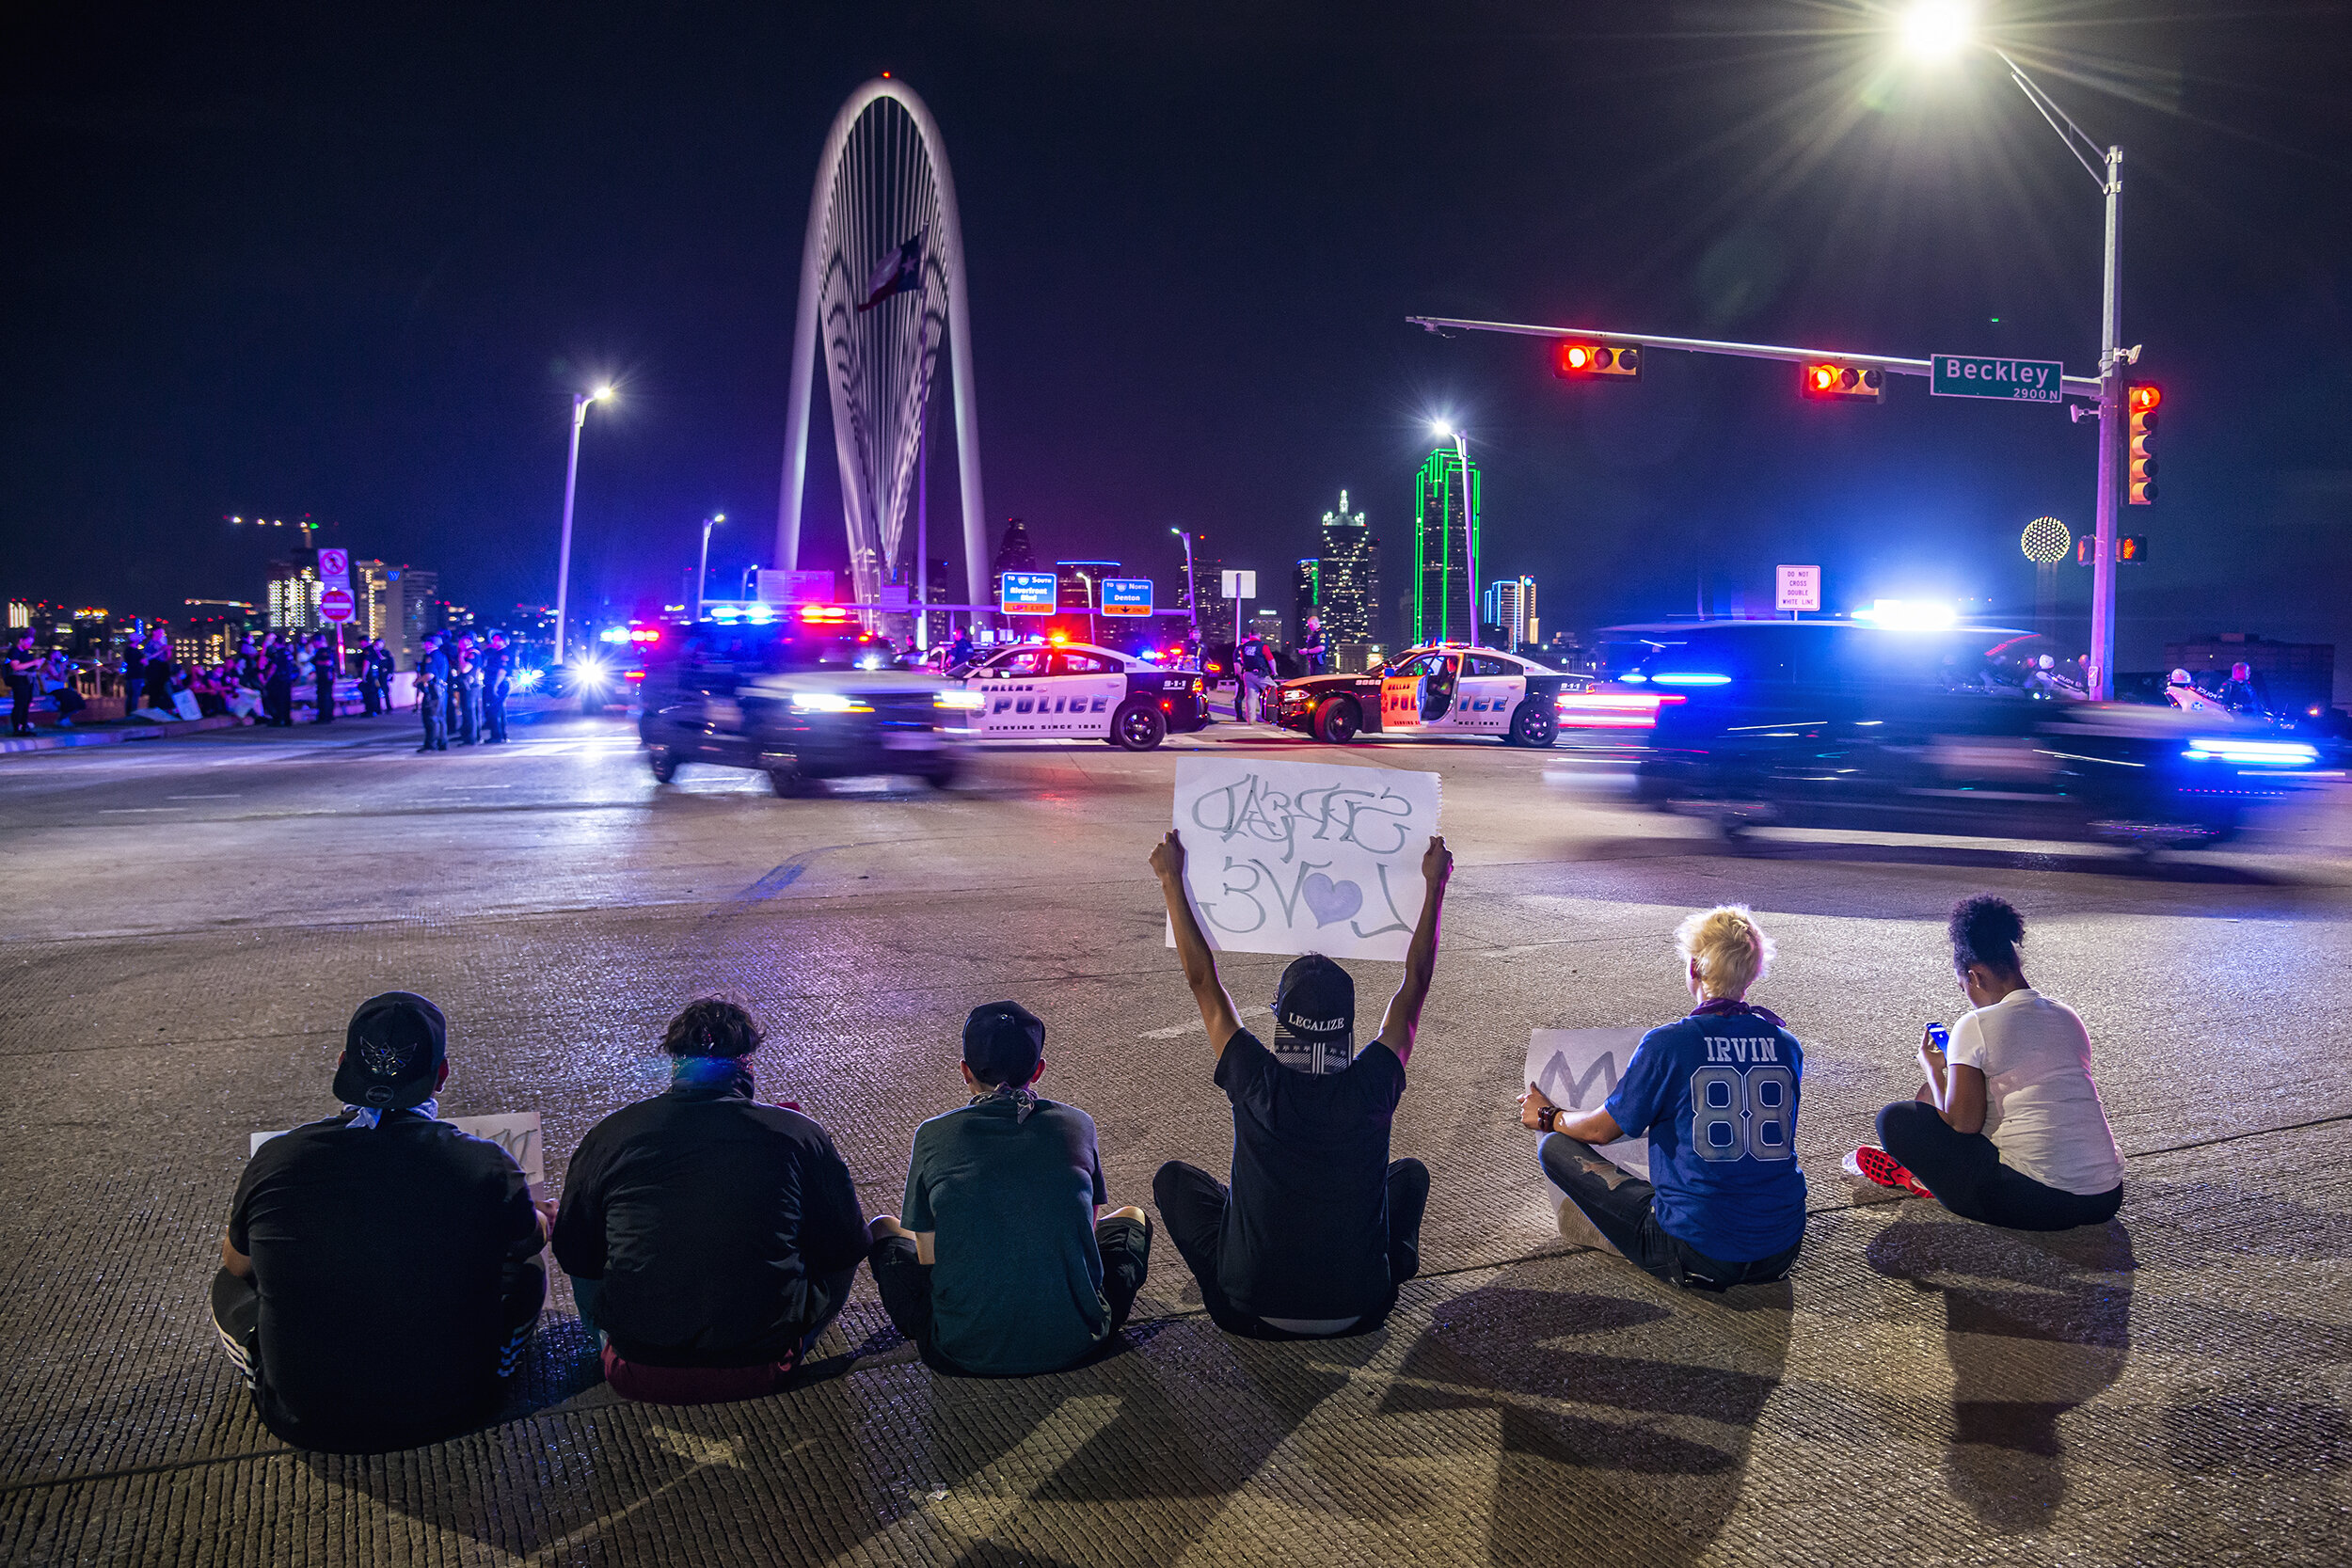  A protester holds up a sign reading “spread love” as police withdraw from the Margaret Hunt Hill Bridge in Dallas, TX on June 1, 2020.  After trapping and detaining over 700 protesters on the bridge in a massive kettling maneuver, the protesters wer